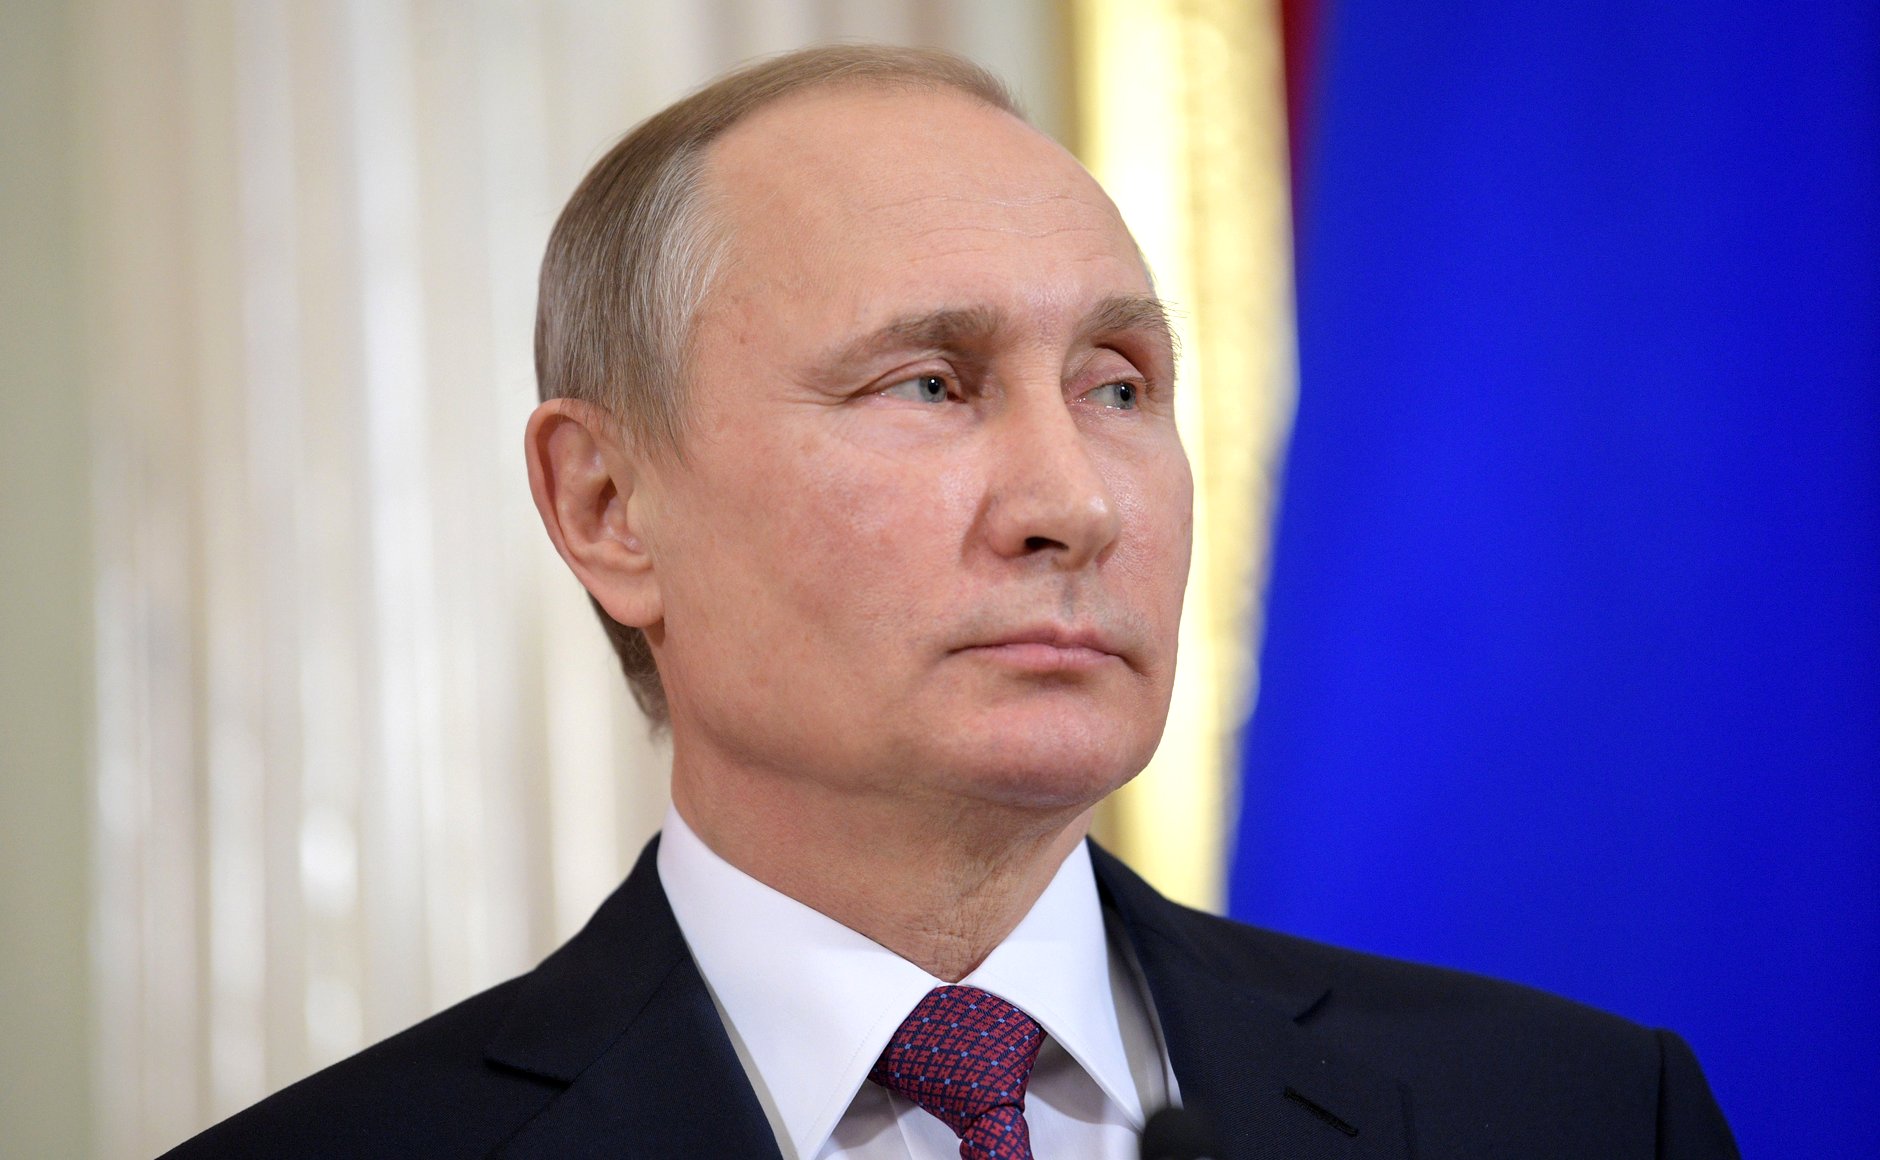 RPT-ANALYSIS-For Putin, economic and political reality dampen appetite for arms race